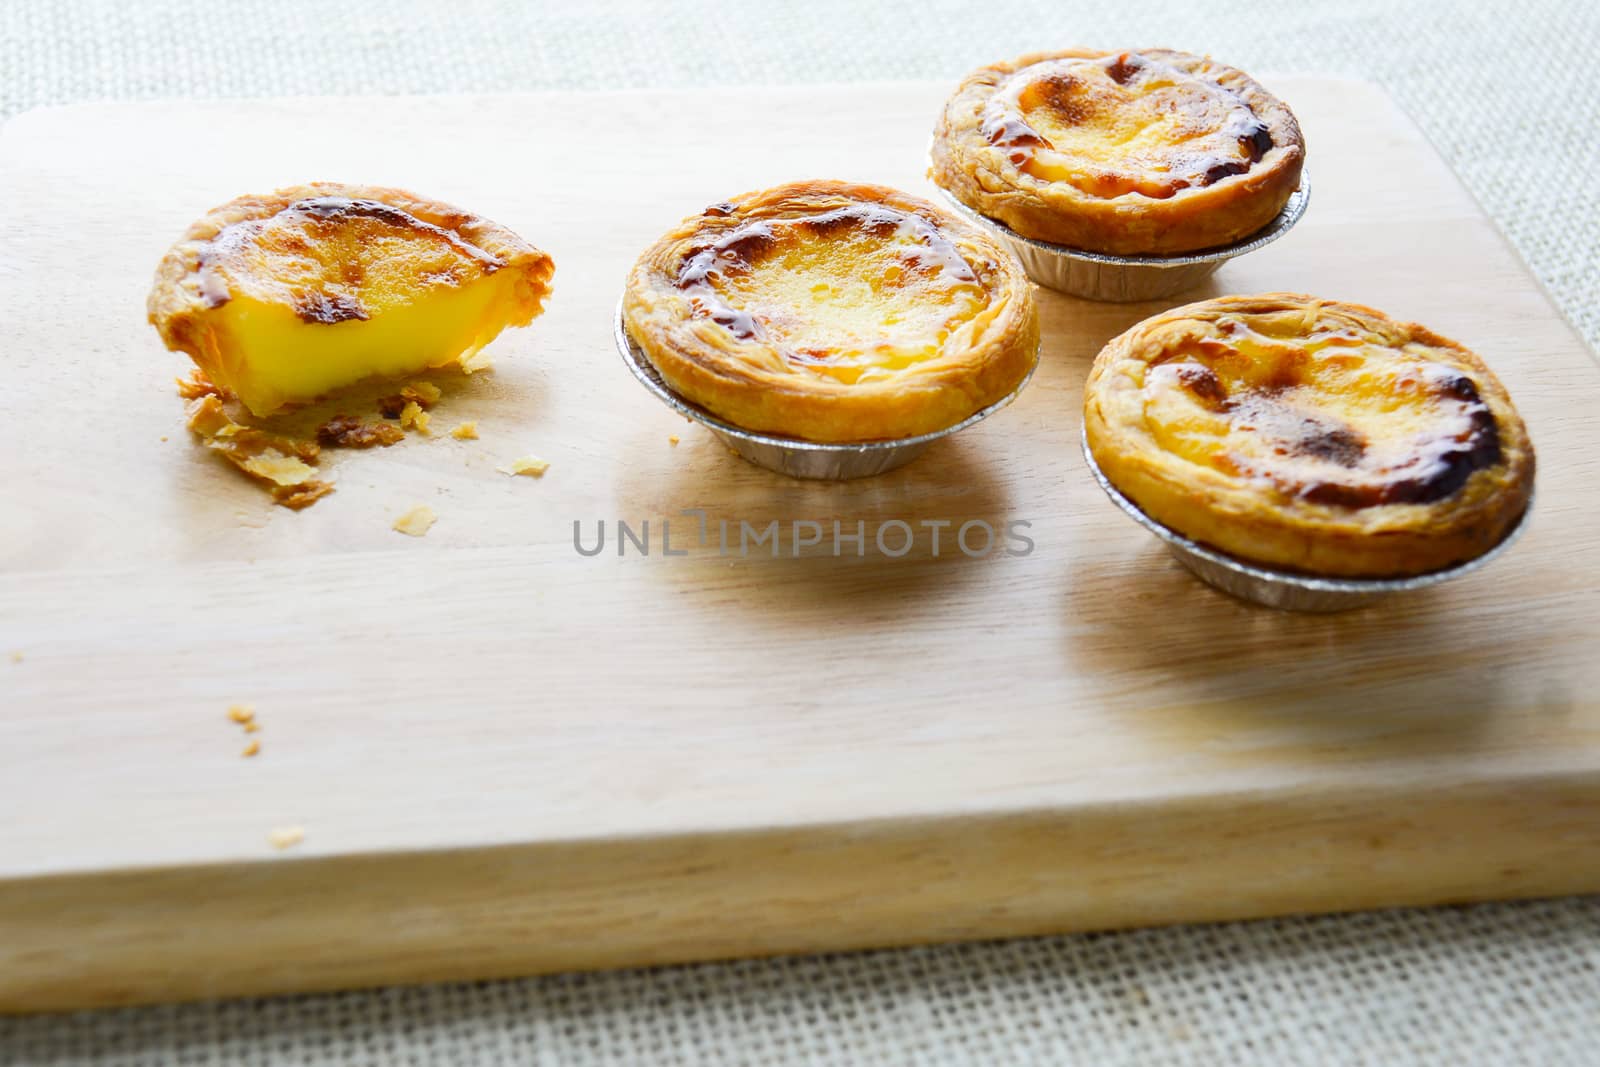 Portuguese Egg Tarts, is a kind of custard tart found in various Asian countries. The dish consists of an outer pastry crust and is filled with egg custard and baked.
